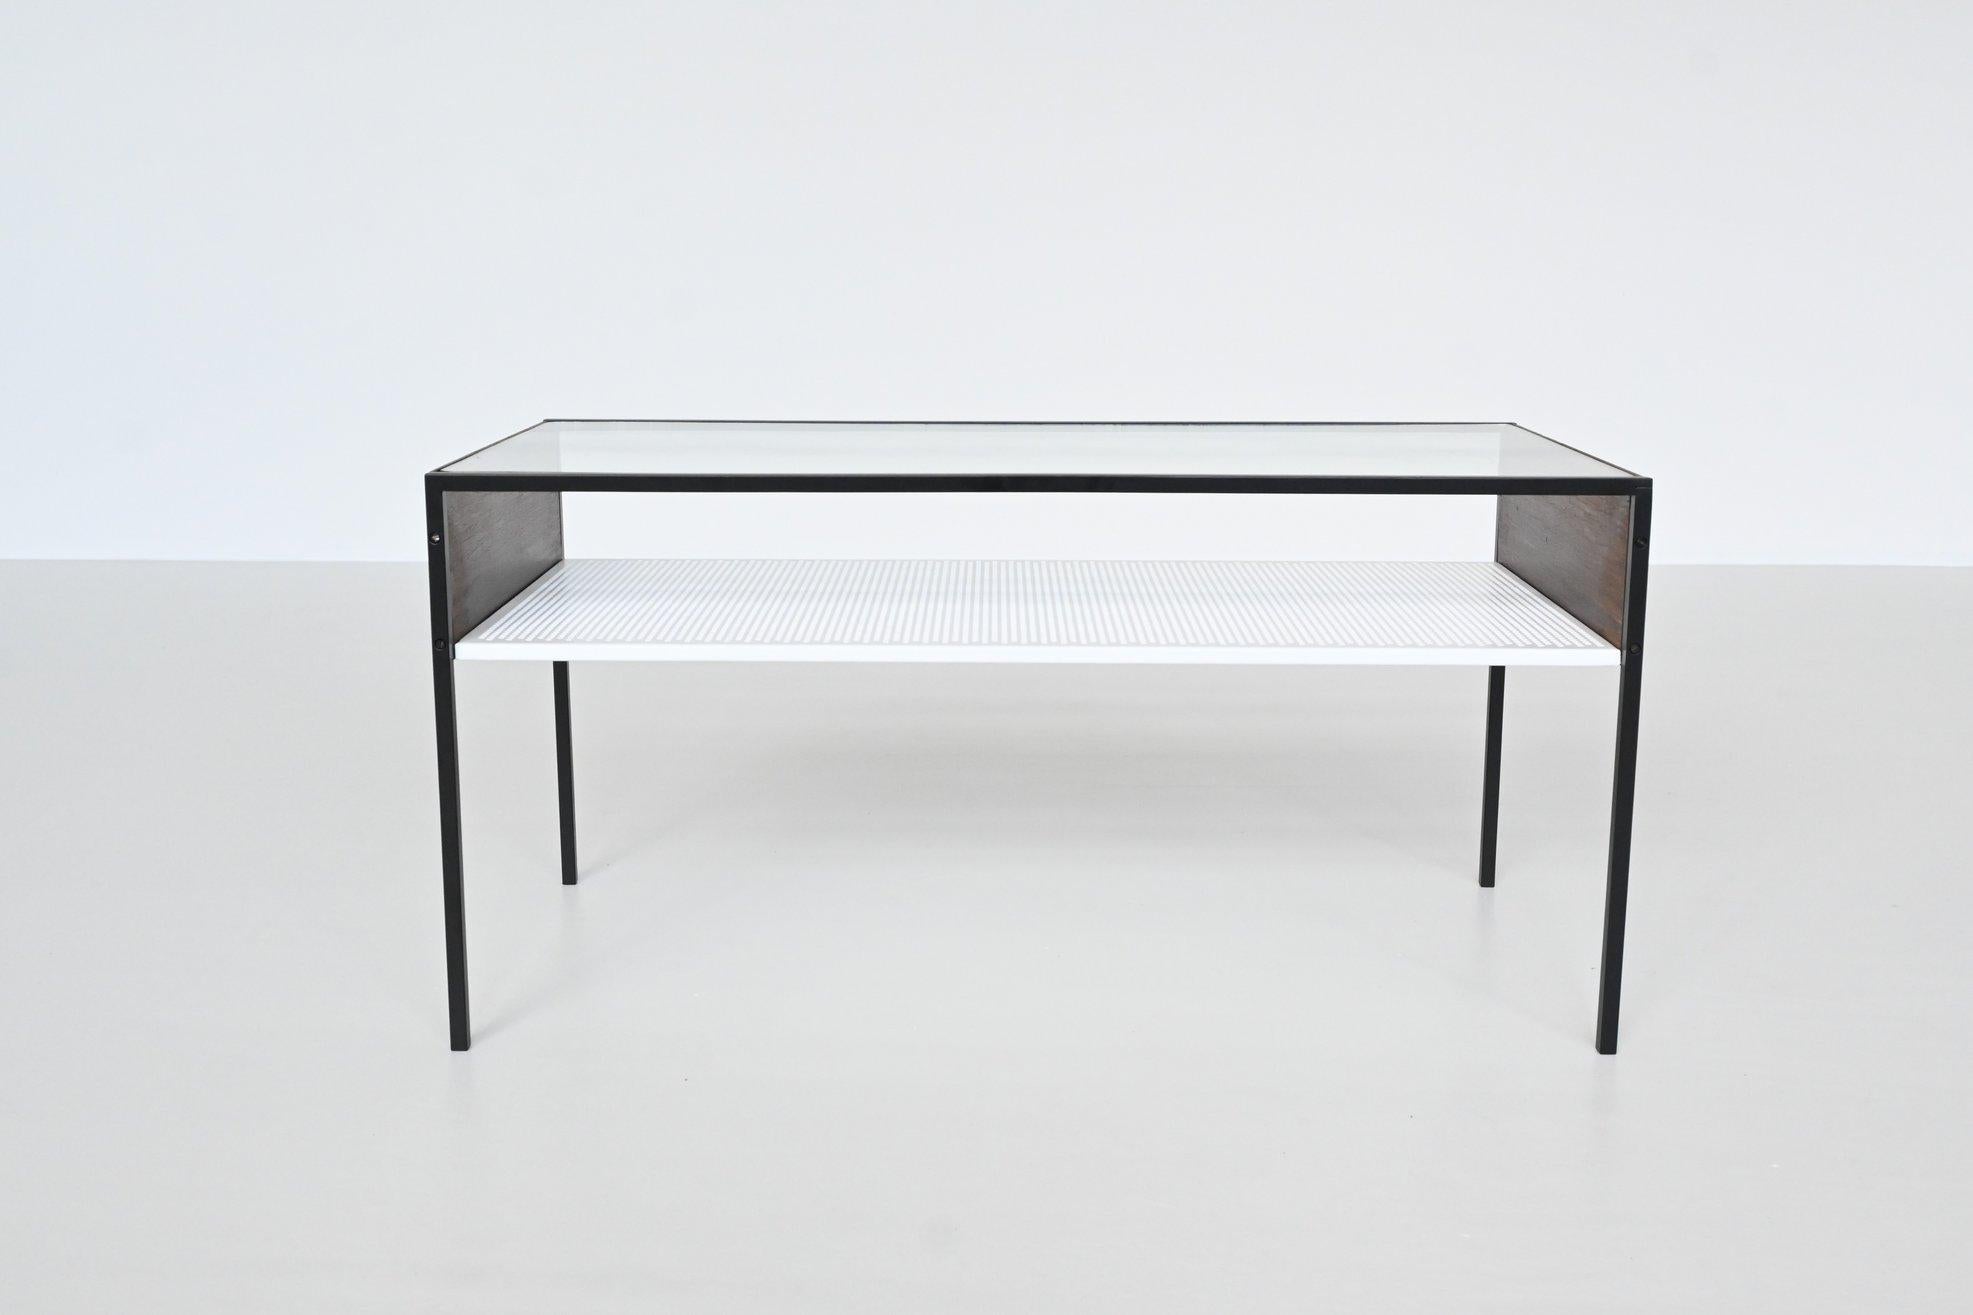 Very nice and rare minimalistic coffee table designed Hein Salomonson and manufactured by AP Originals, The Netherlands 1950. This coffee table is very minimal in its aesthetic. It has clean rectilinear lines comprising a black coated metal frame